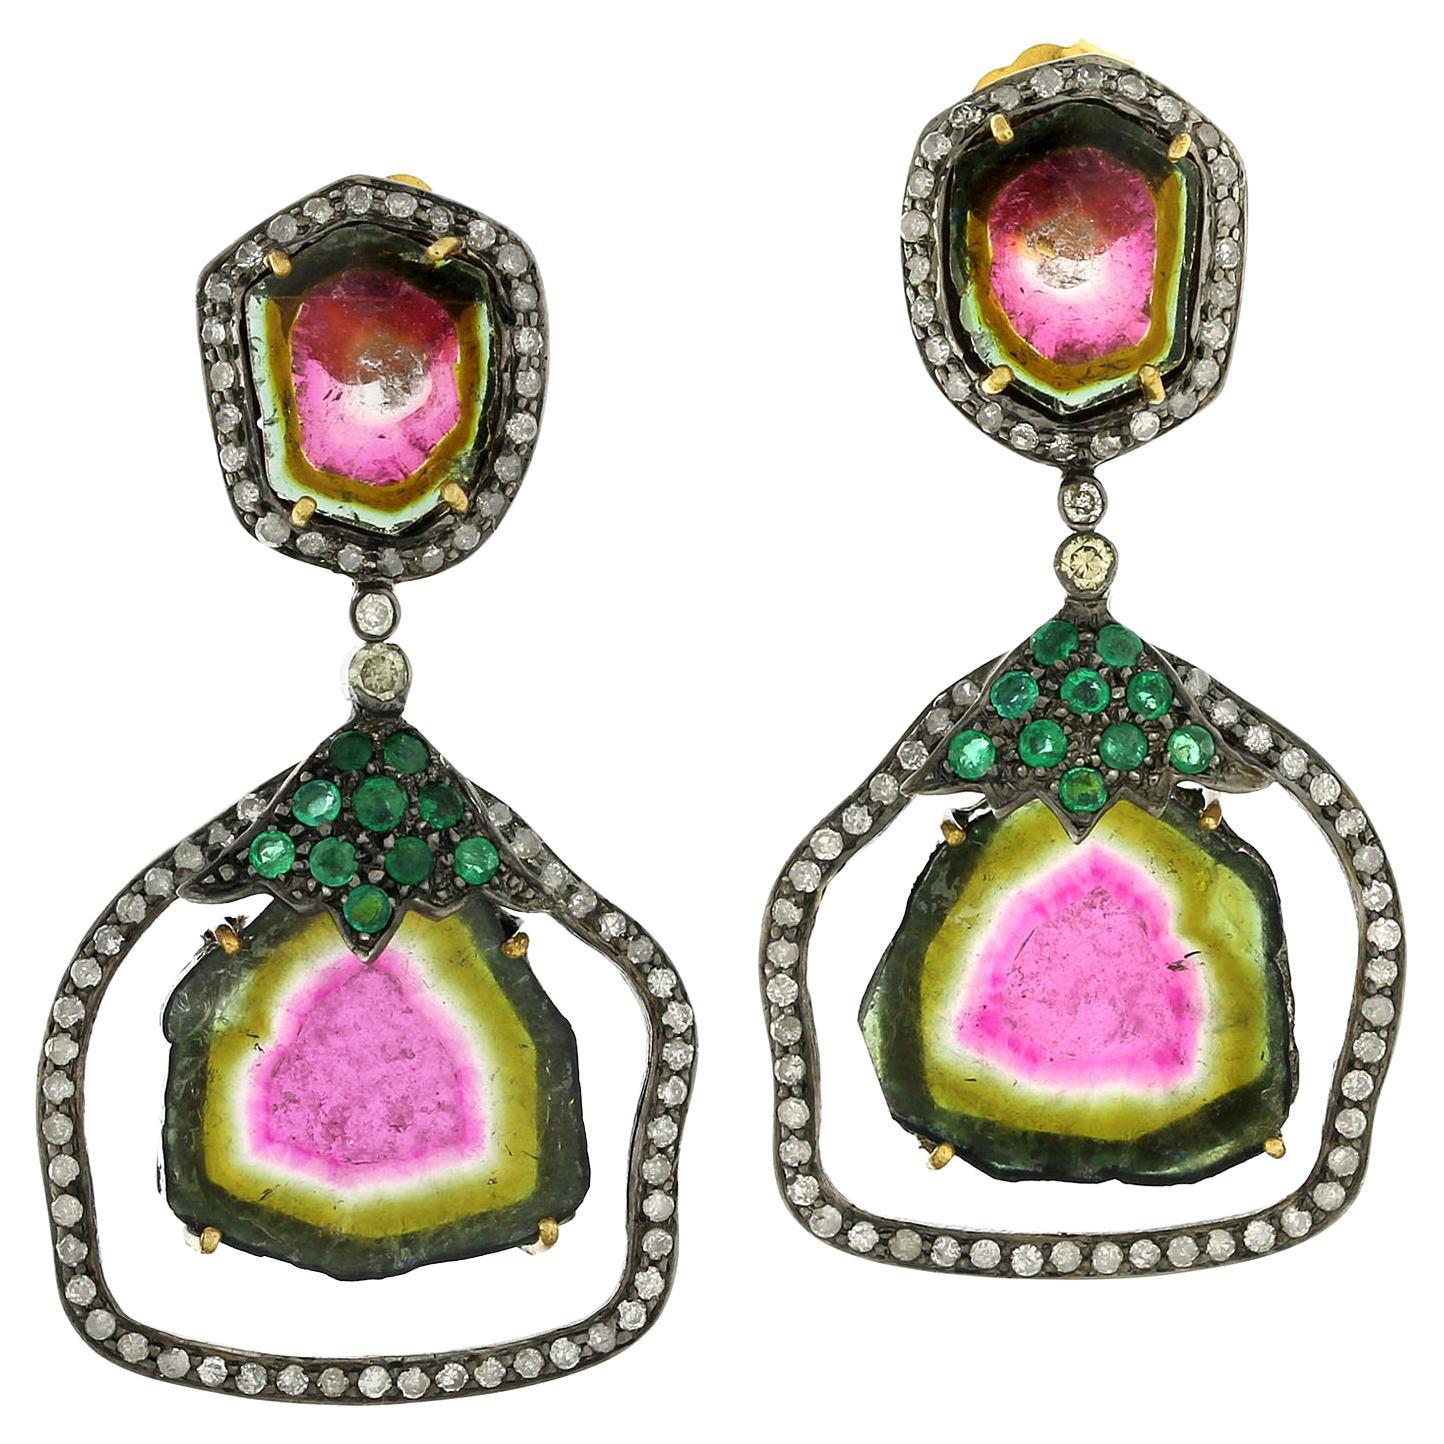 Watermelon Tourmaline Earrings With Emerald & Pave Diamonds In 18k Gold & Silver